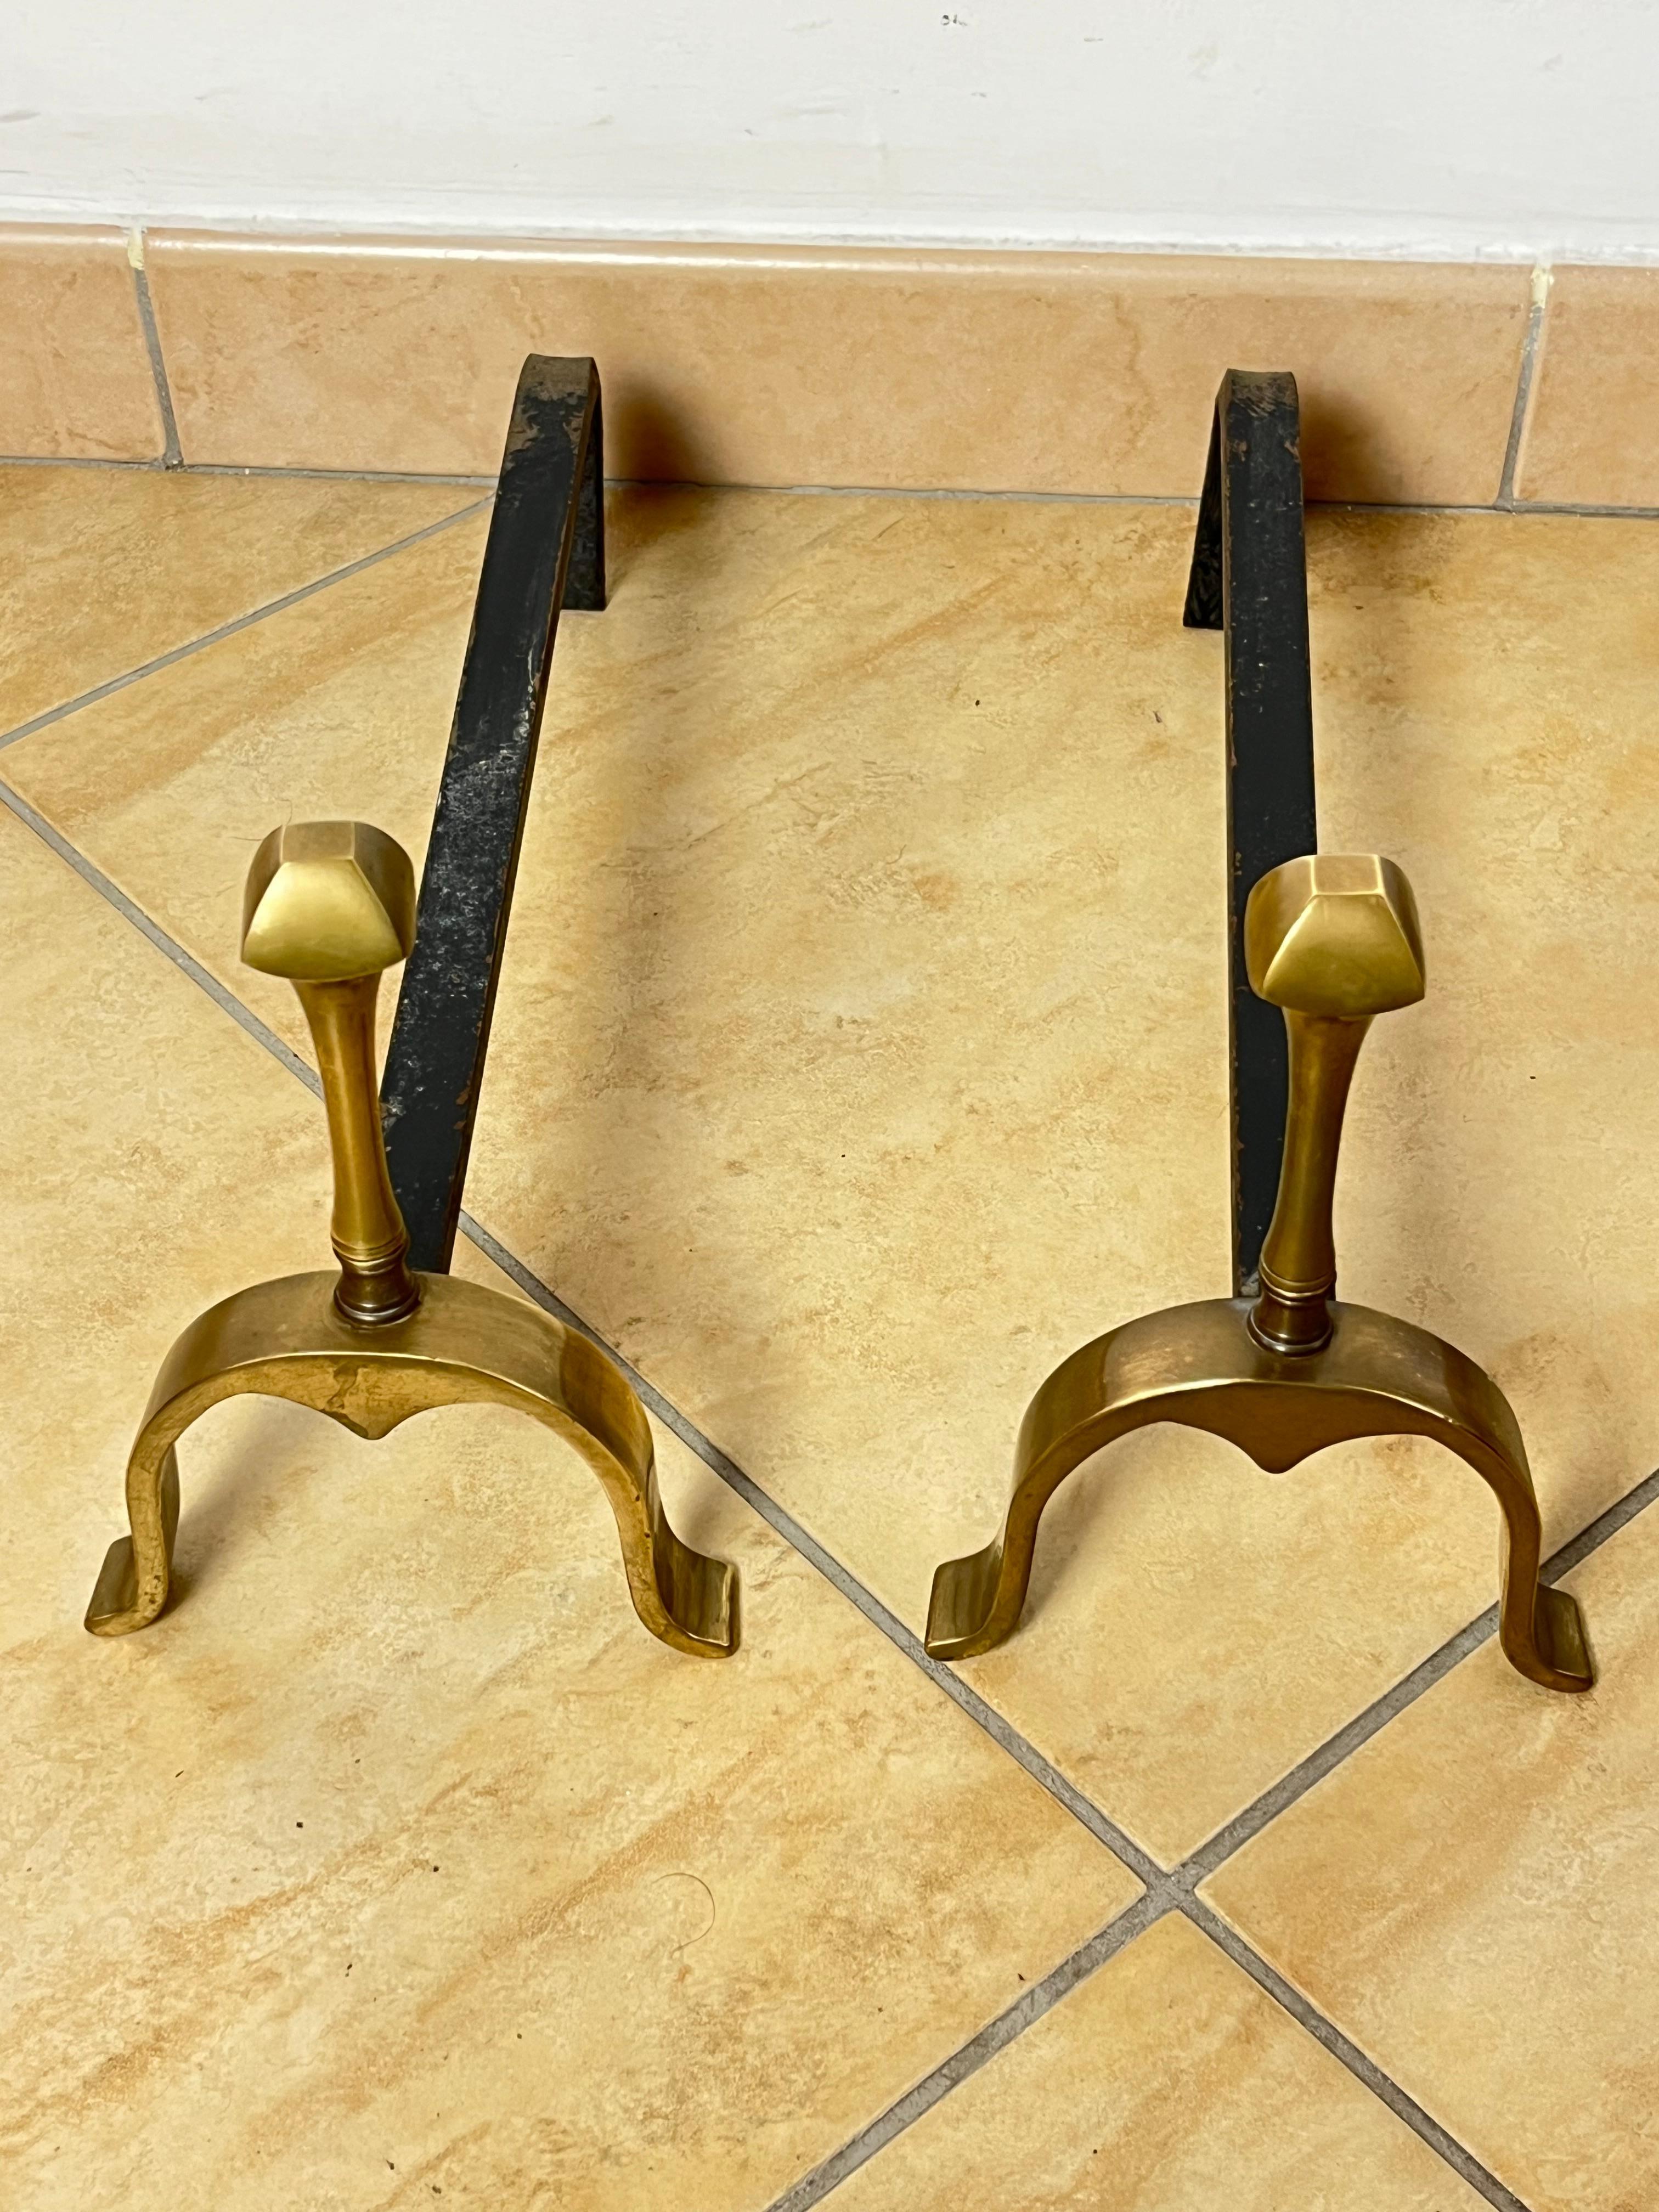 Set of 2 brass and iron fireplace andirons, Italy, 1970s
Found inside a noble villa, good condition.